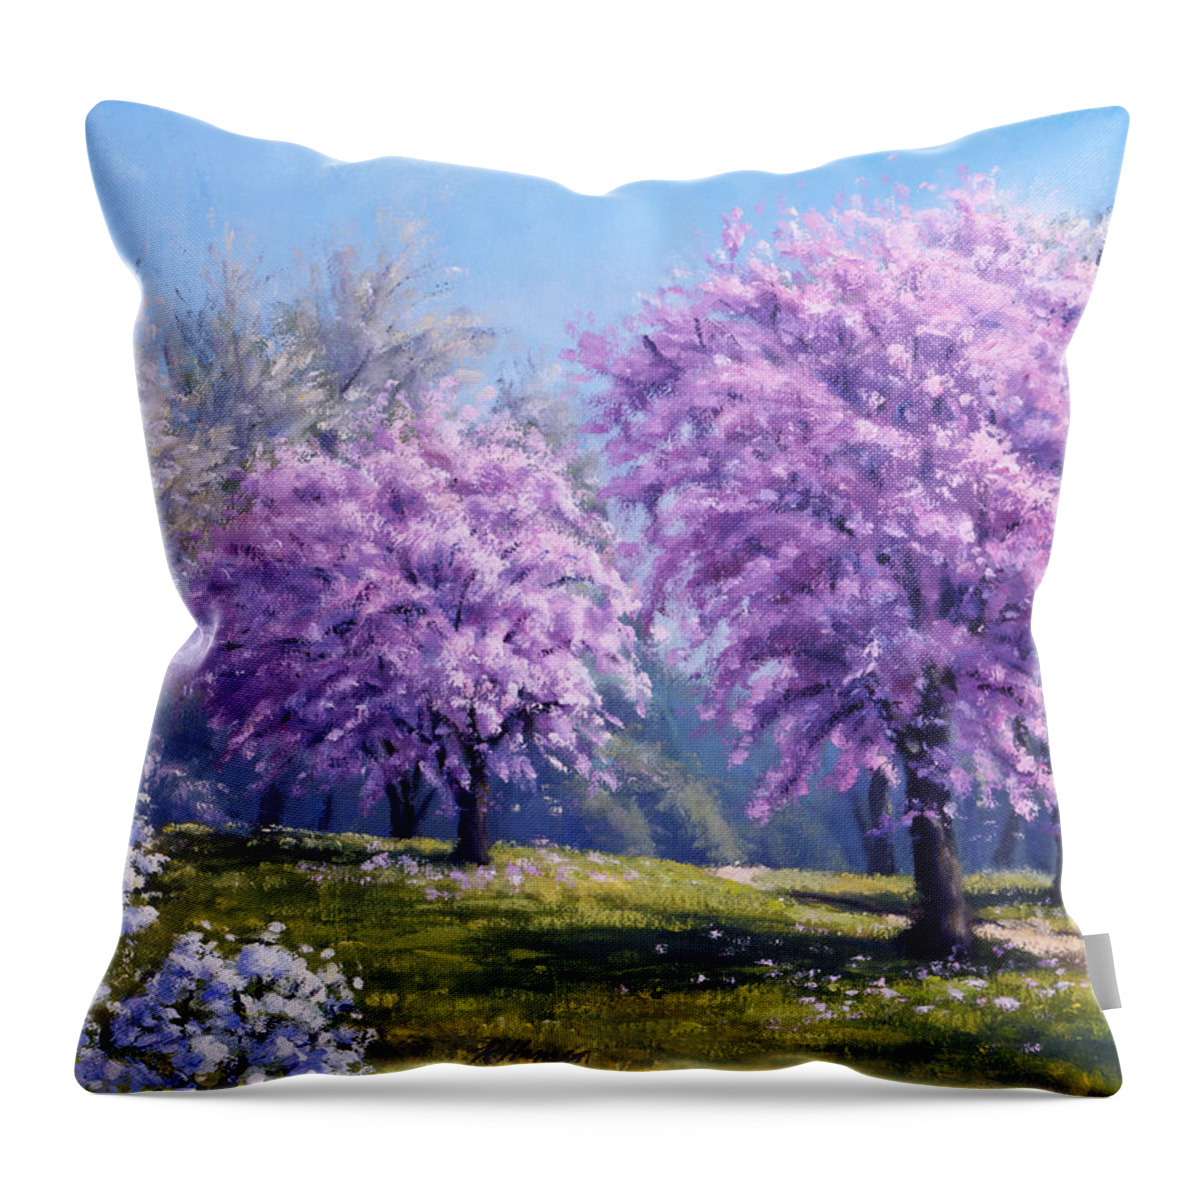 Landscape Throw Pillow featuring the painting Como Park Blossoms by Rick Hansen